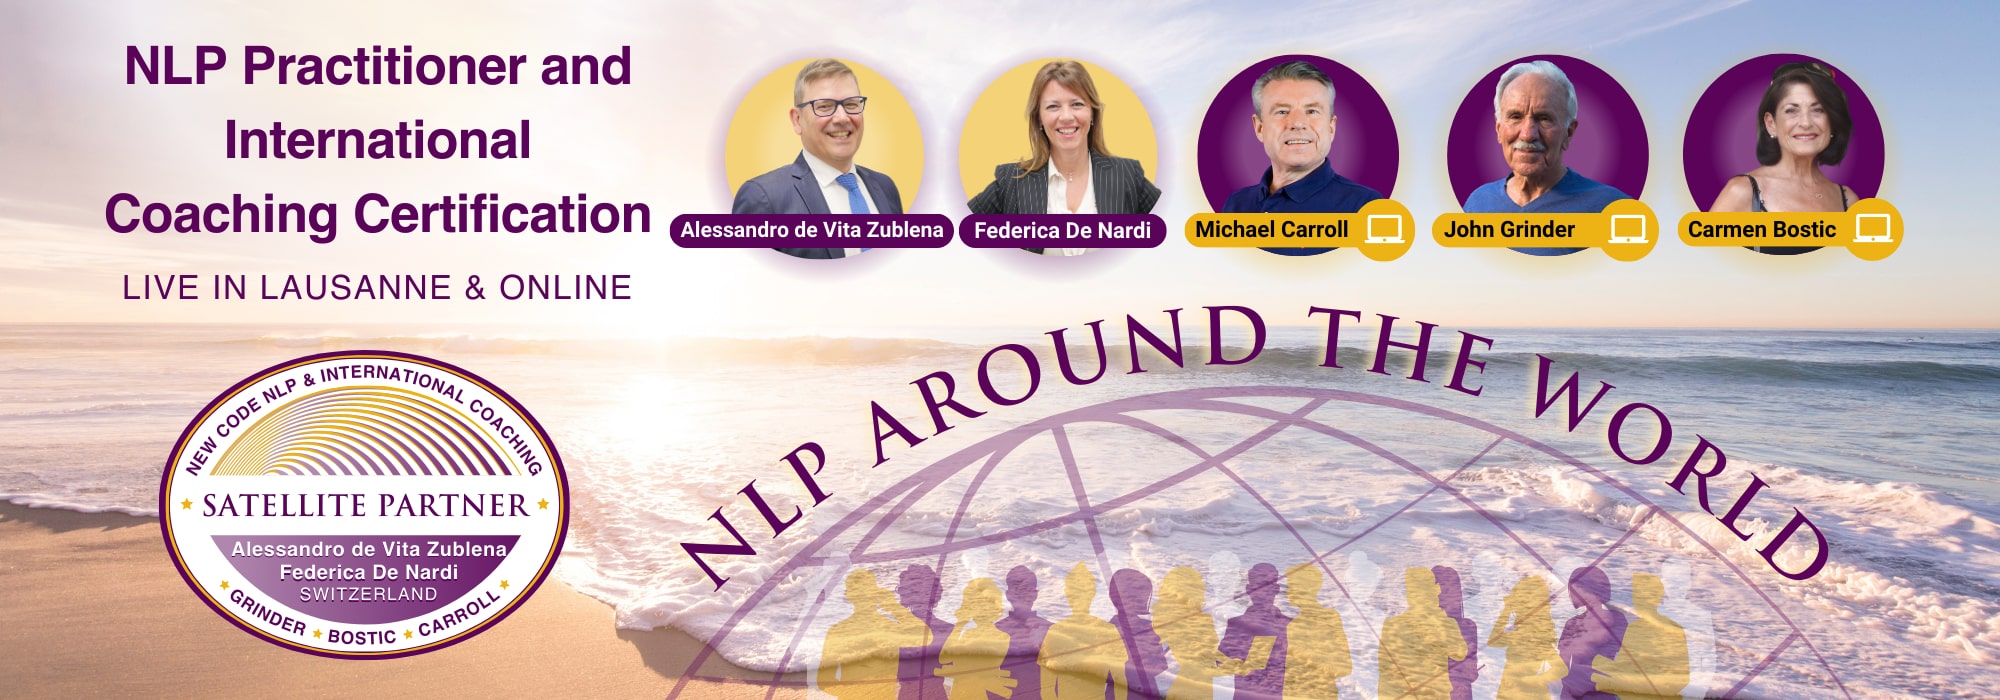 NLP Practitioner and International Coaching Certification